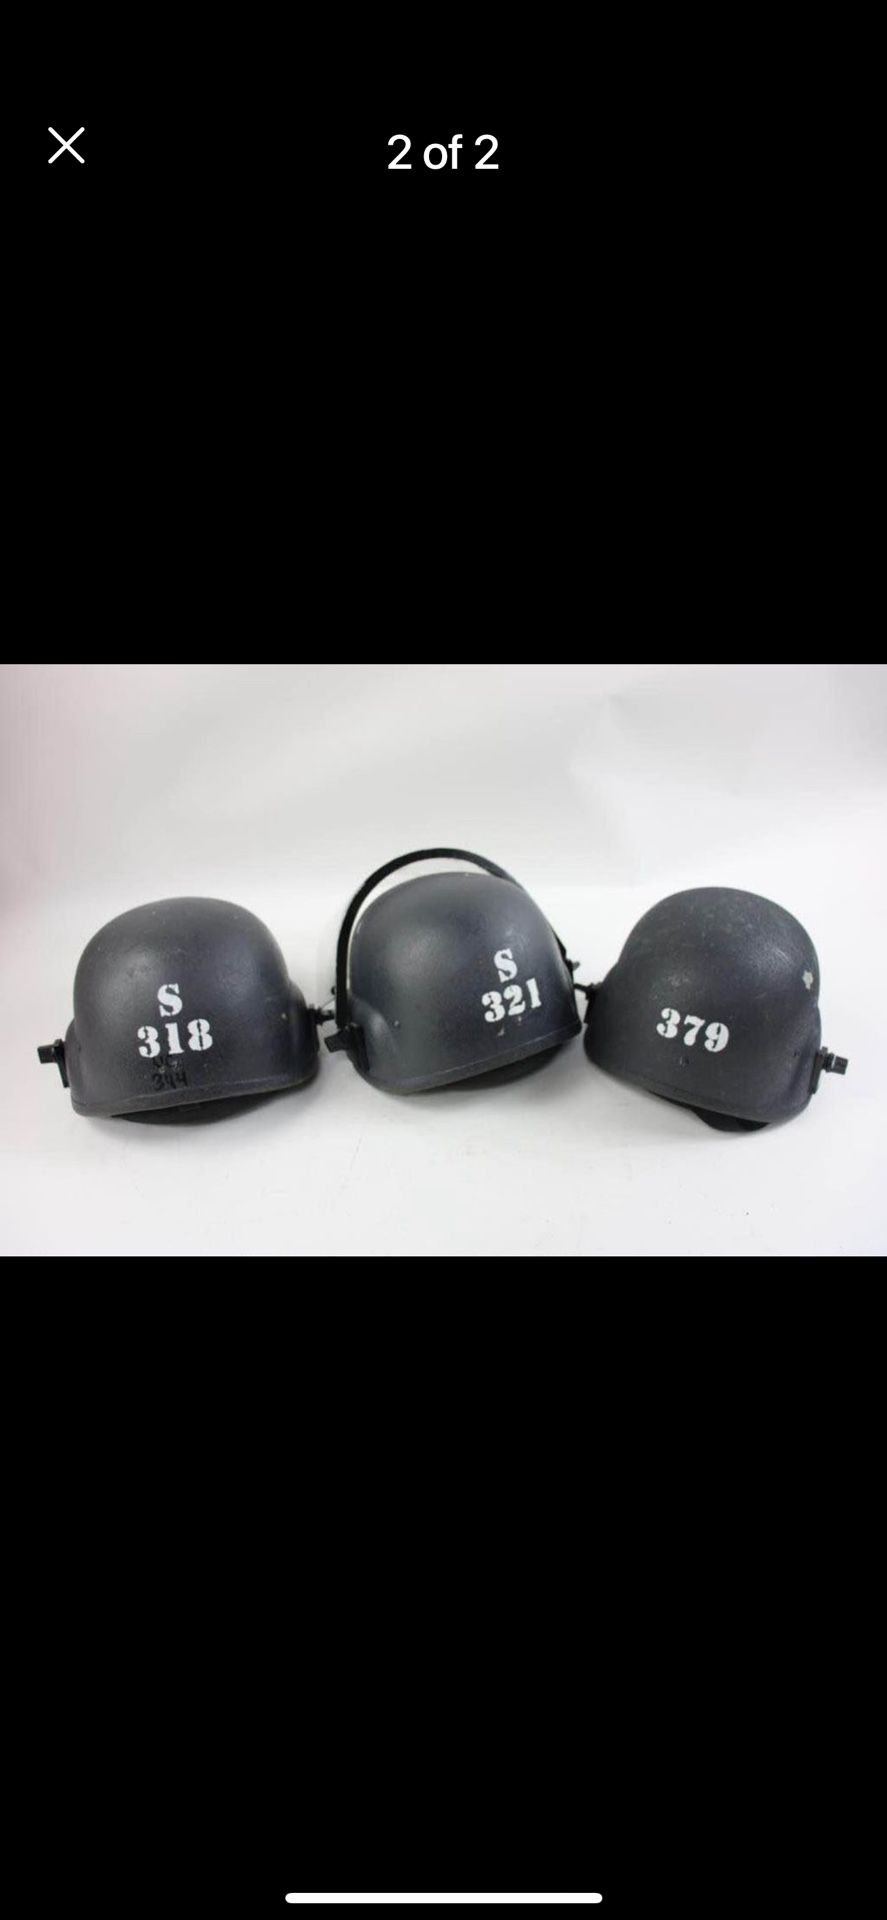 S.W.A.T,  Law Enforcement, Police Helmet (6 available) Including Face Shield 